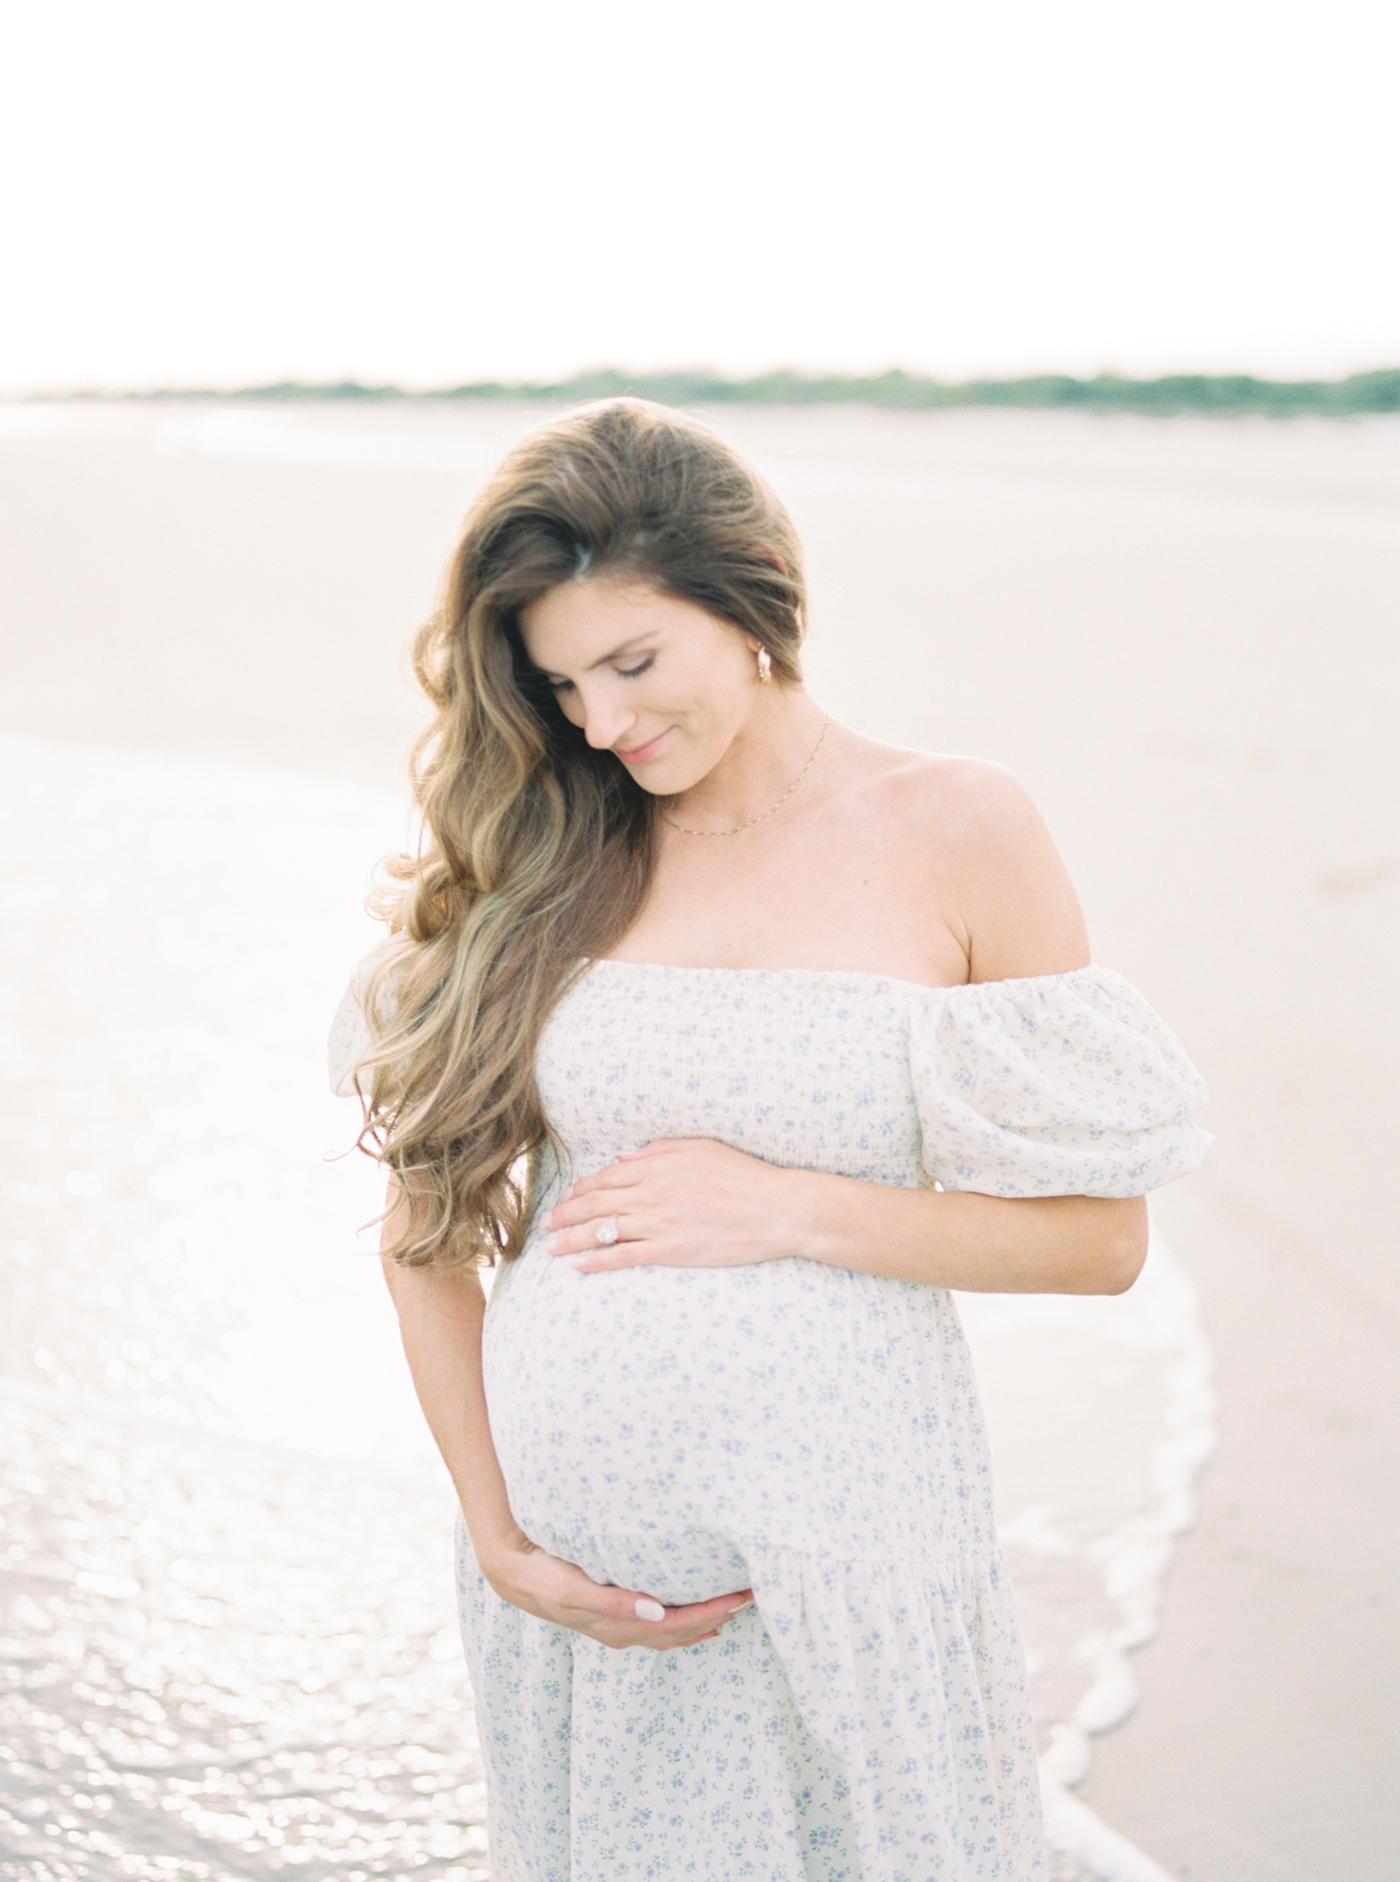 Expectant mother on the beach at Sullivans Island | Photo by Caitlyn Motycka Photography.